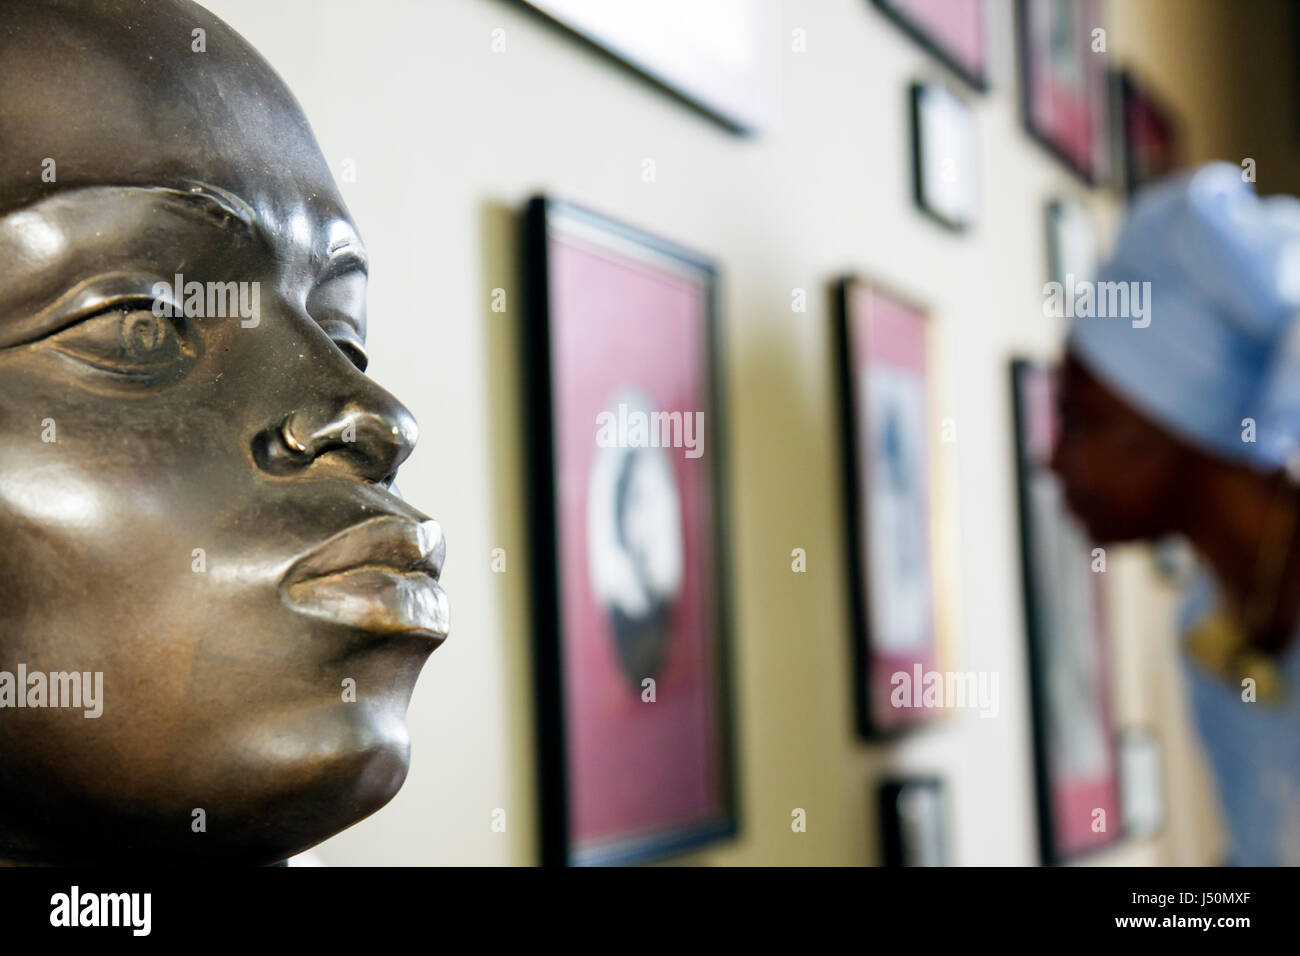 Alabama,Dallas County,Selma,National Voting Rights Museum & Institute,Civil Rights Movement,segregation,Black History,bust,face,exhibit exhibition col Stock Photo